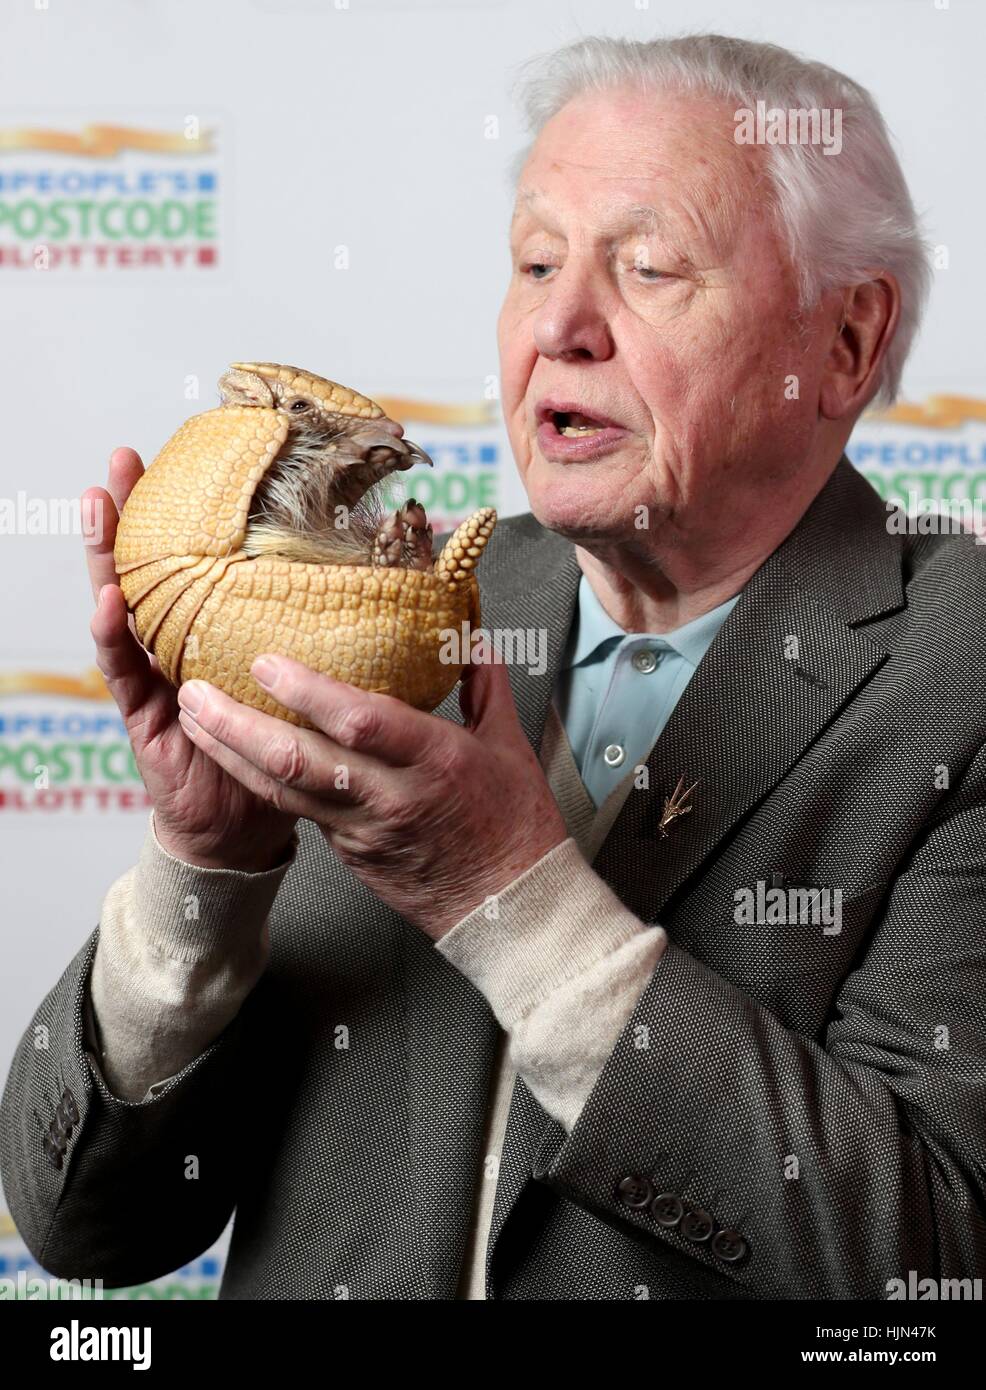 Sir David Attenborough holds 'Inti', an armadillo from Edinburgh Zoo, before receiveing a &Acirc;£250,000 cheque from the People's Postcode Lottery for the charity Fauna & Flora International of which he is Vice-President, at Prestonfield House, Edinburgh. Stock Photo